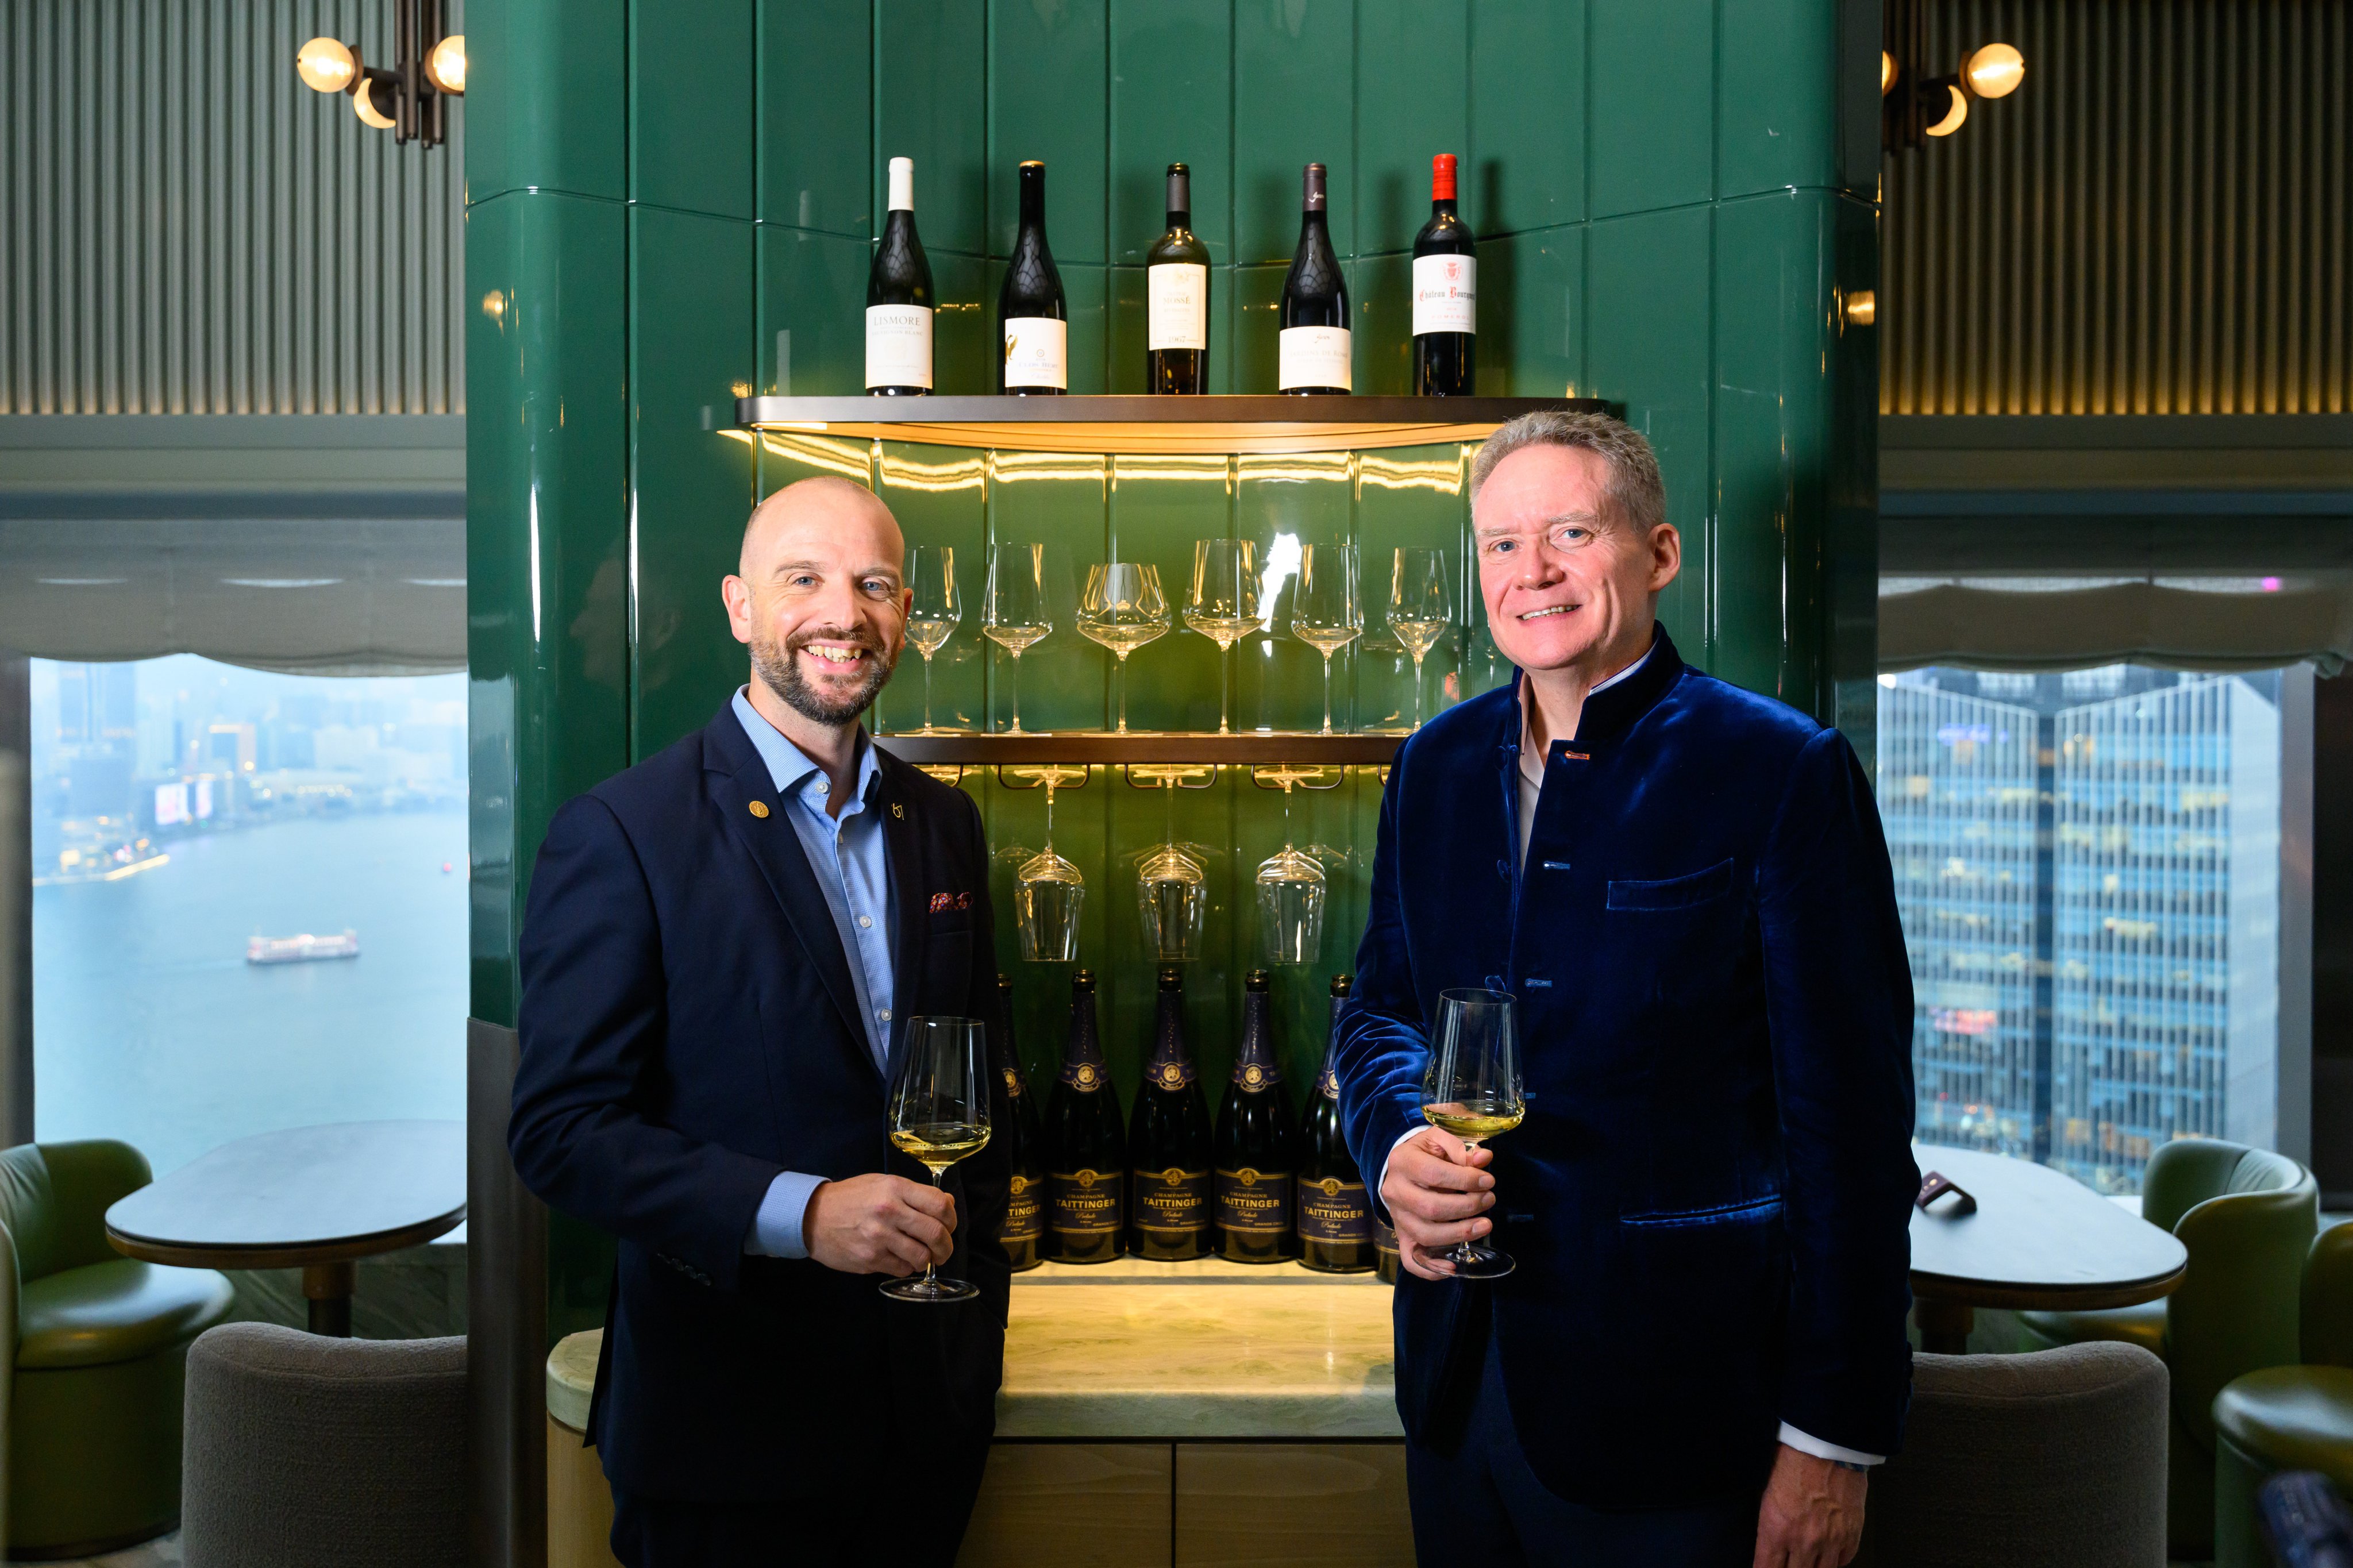 International wine club 67 Pall Mall has opened its first membership programme in Hong Kong, and for an annual fee of US$1,900, members can access high-end events and tastings in the city. Master of Wine Richard Hemming (left) with 67 Pall Mall CEO and founder Grant Ashton. Photo: 67 Pall Mall